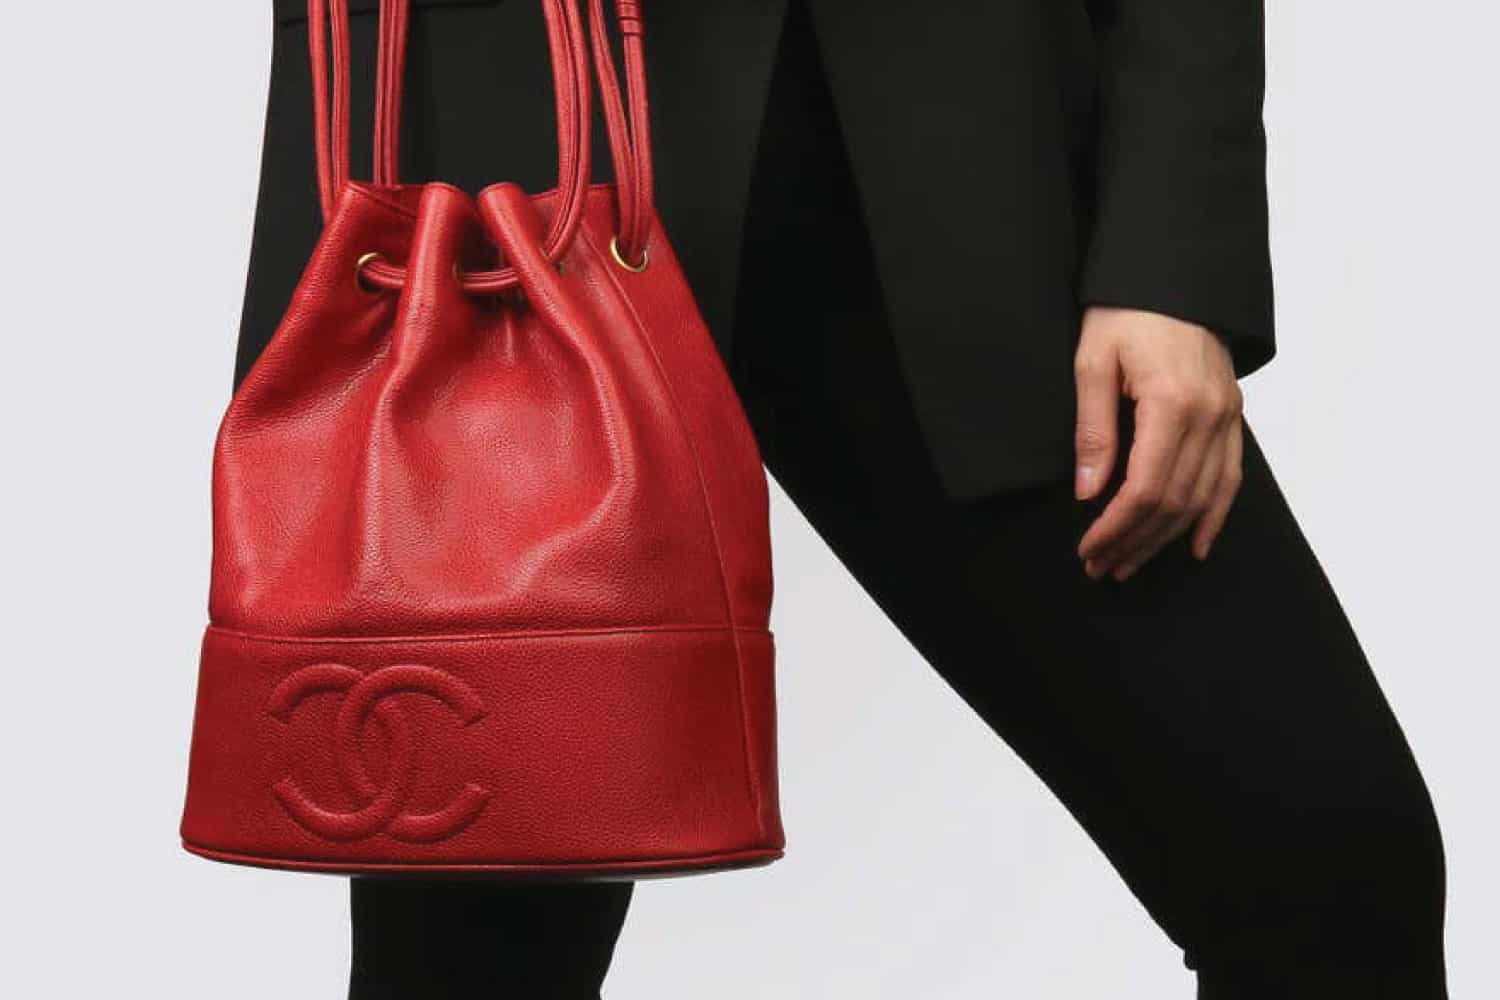 14 Ways to Spot a Fake Chanel Bag